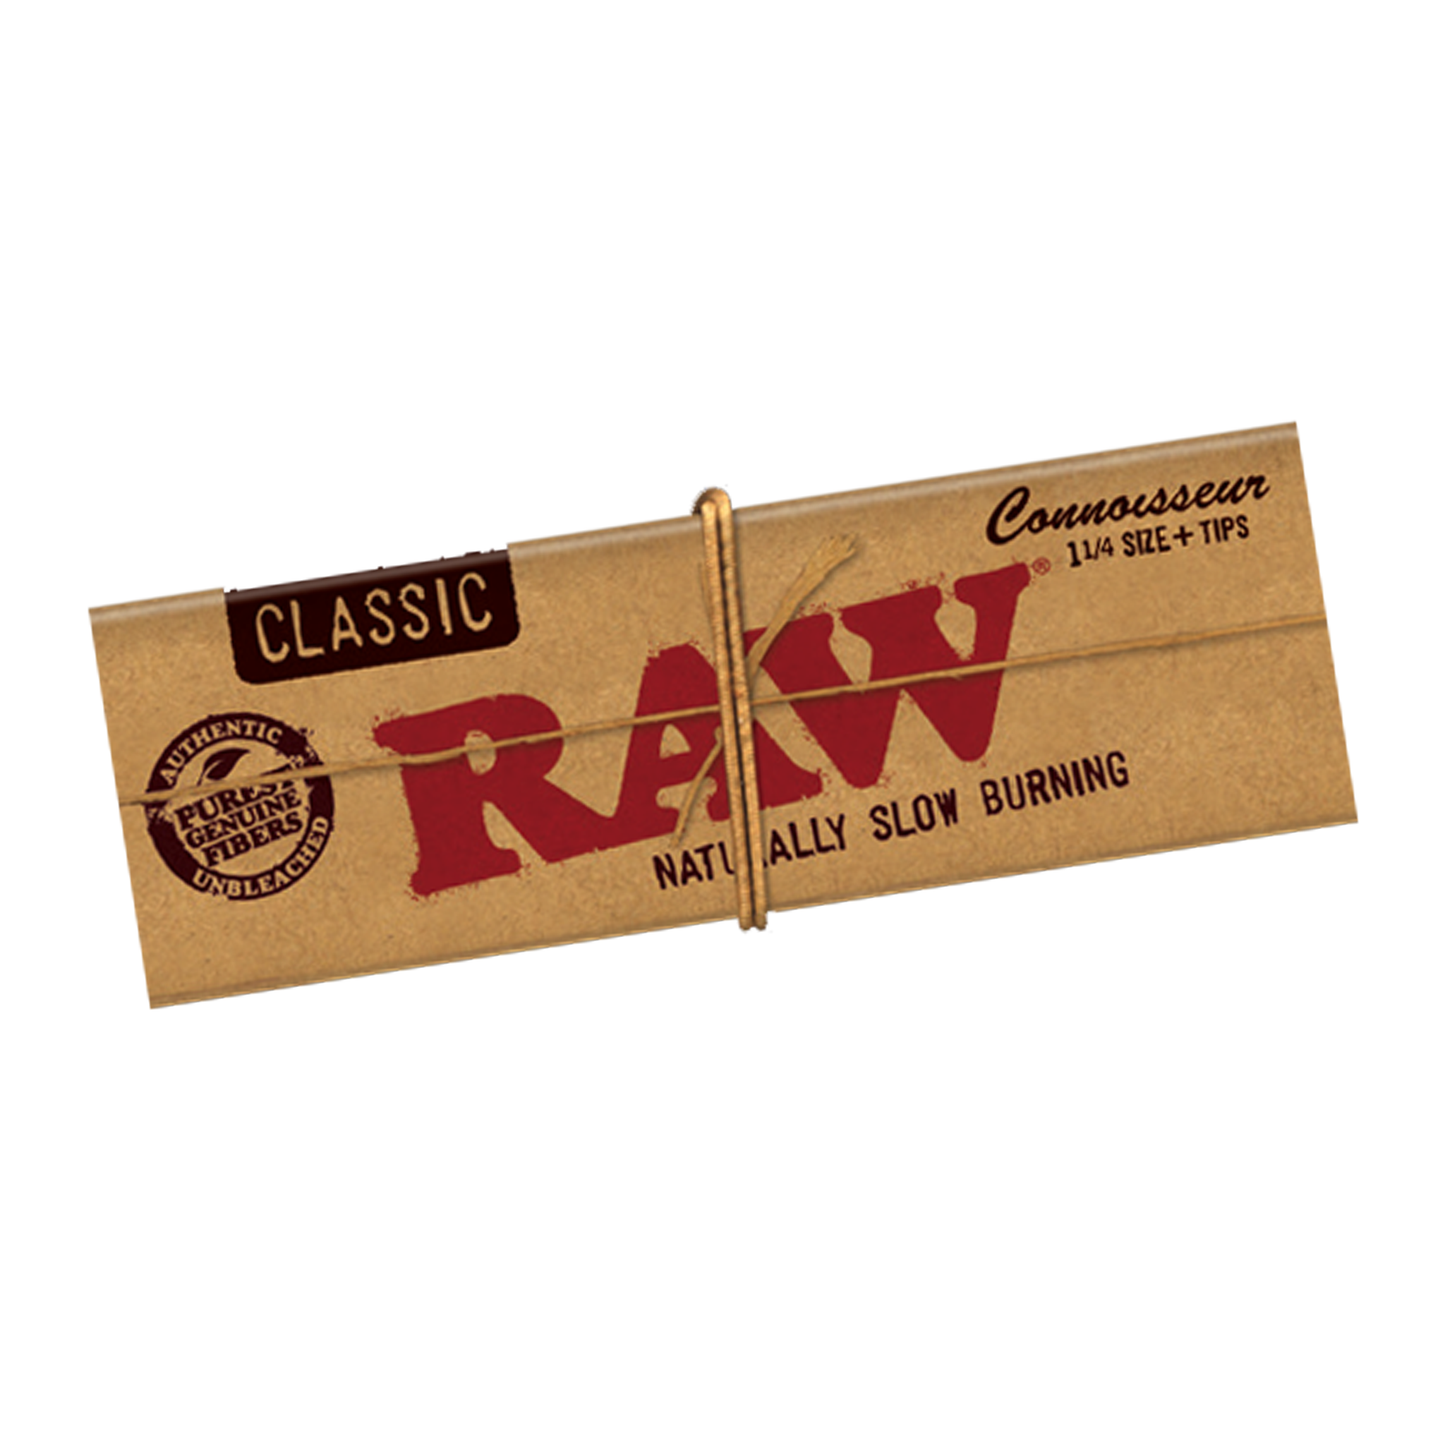 RAW Classic Connoisseur - 1¼, Single Wide, King Size Slim